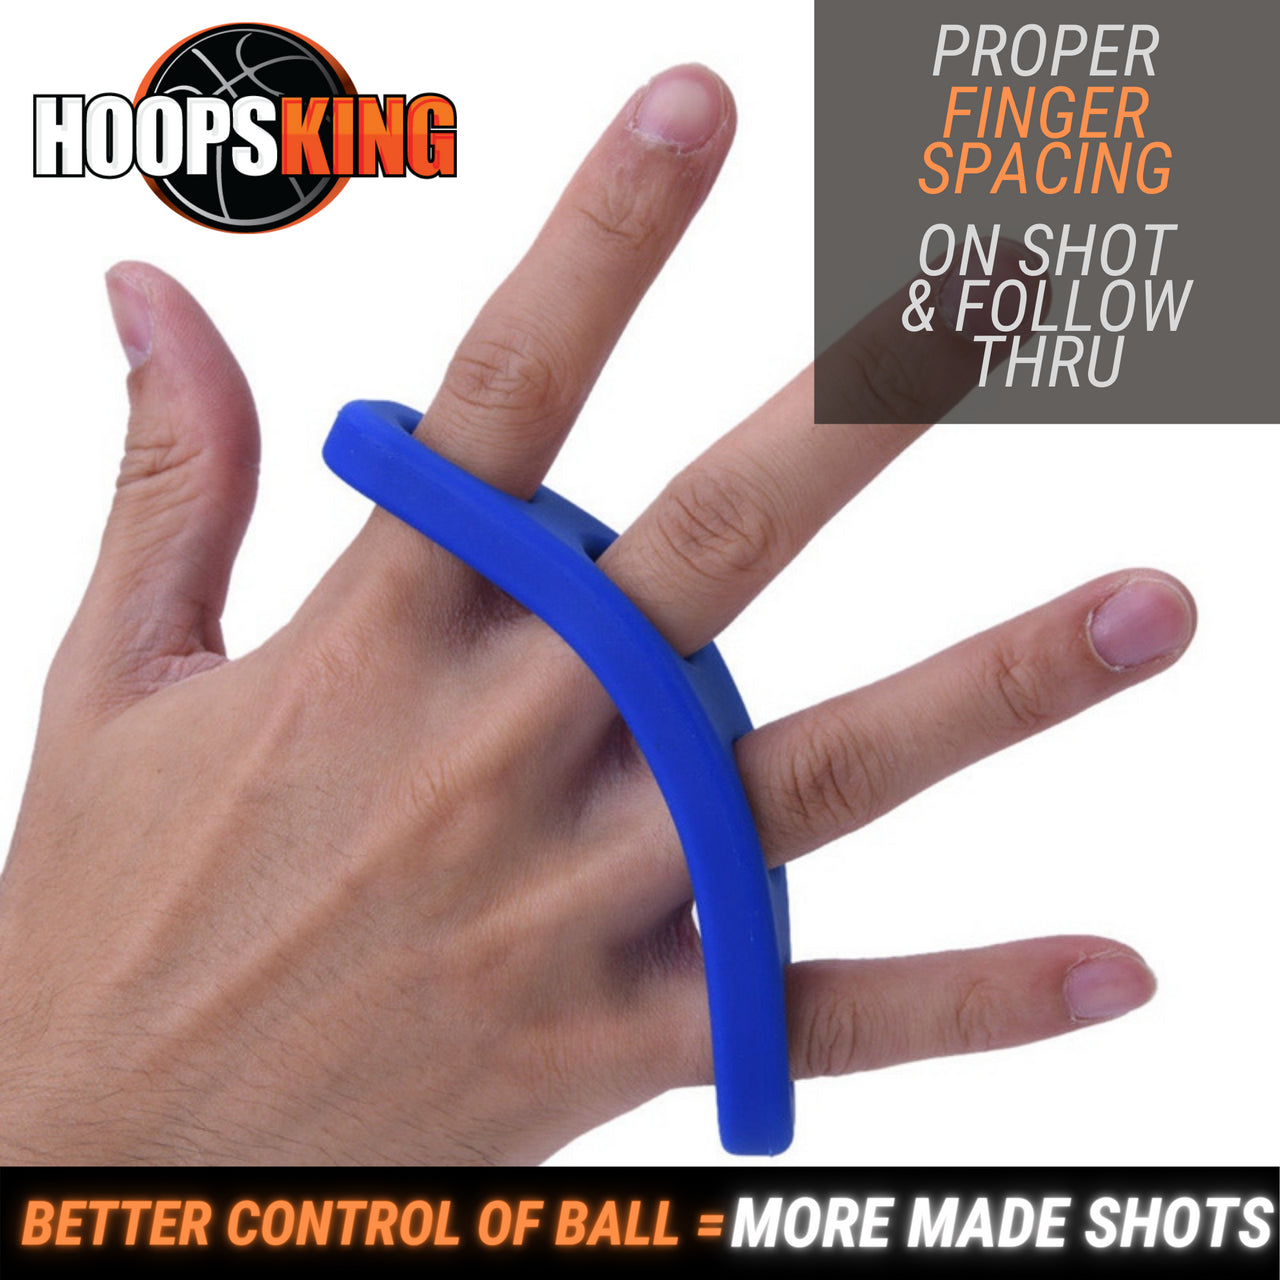 Keep fingers properly spaced  when shooting a basketball